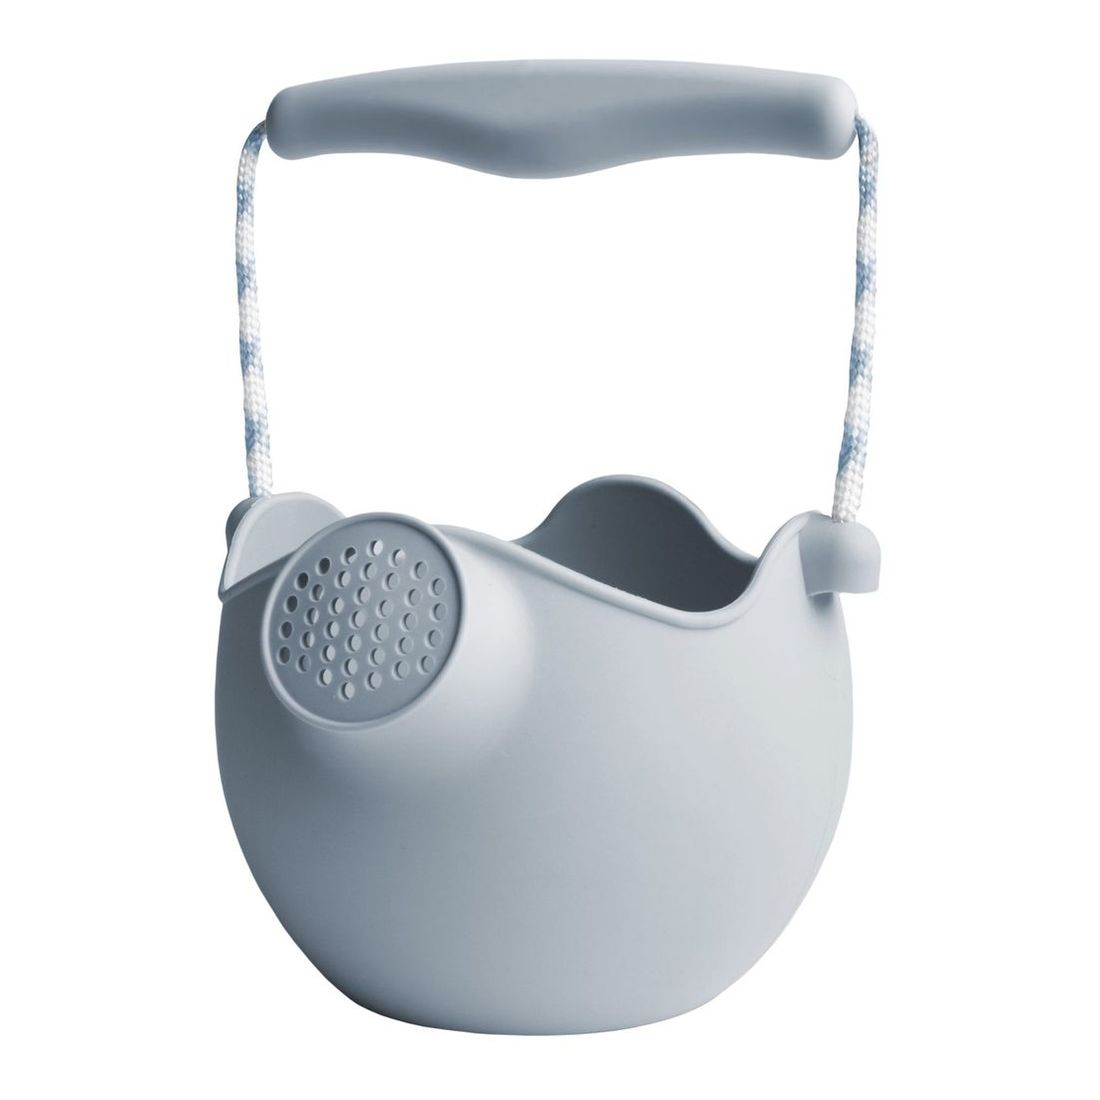 Scrunch Watering Can Sand/Beach Toy - Duck Egg Blue